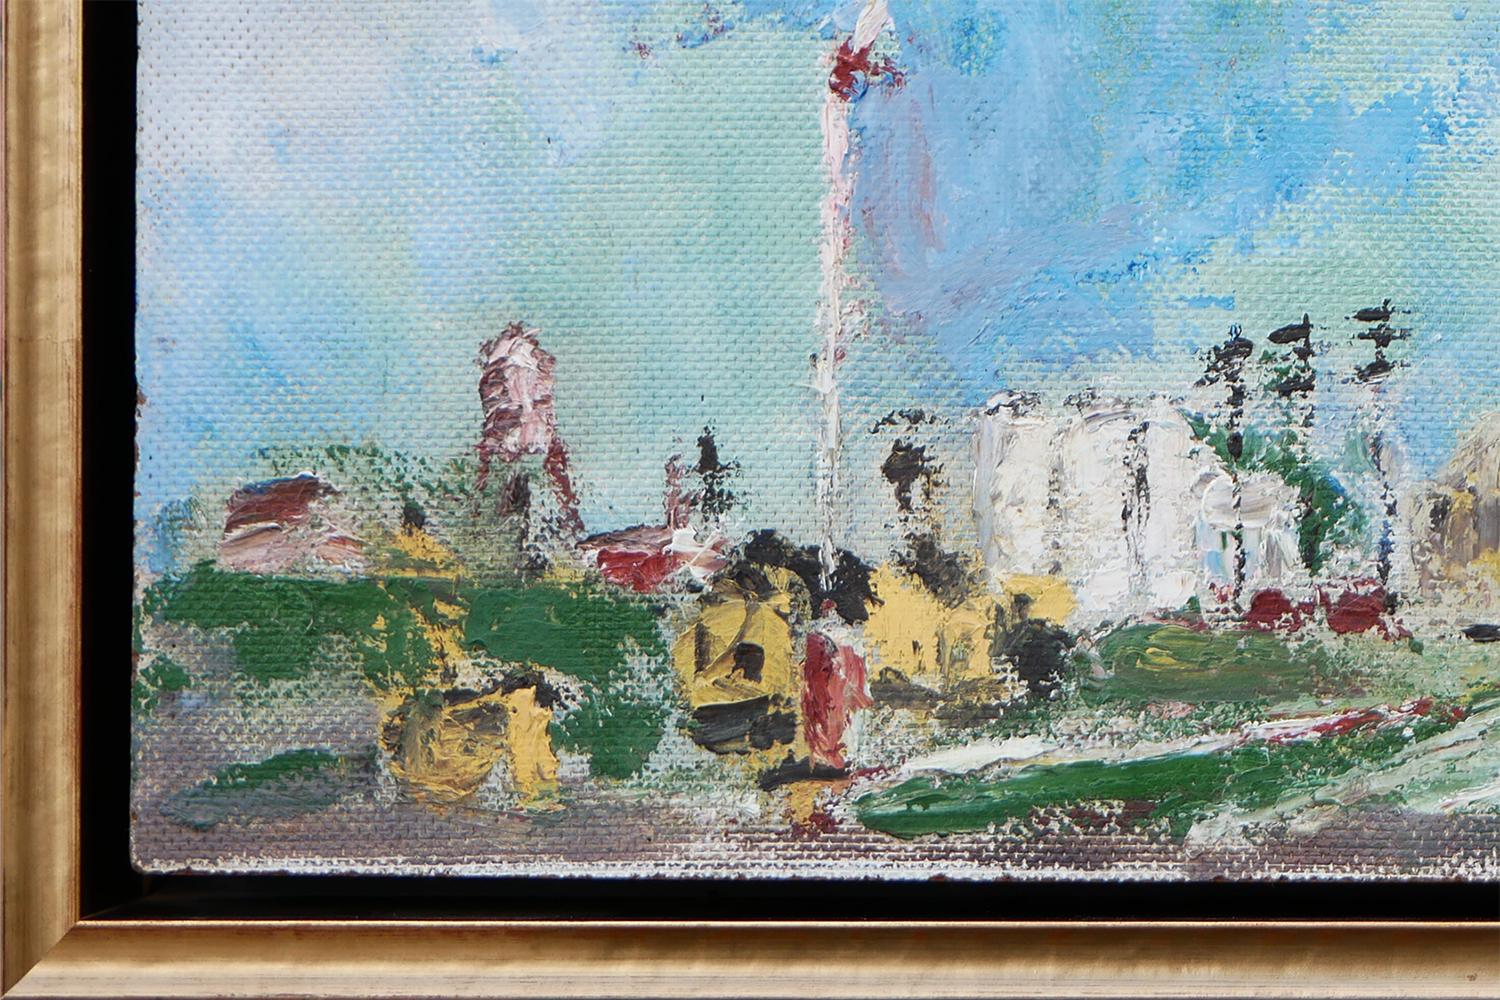 Sky blue-toned abstract impressionist painting by Houston, TX artist Robert Rogan. This painting depicts a railroad with yellow rail freight cars by a village. Signed and dated by the artist at the lower right. Framed in a gold floating frame